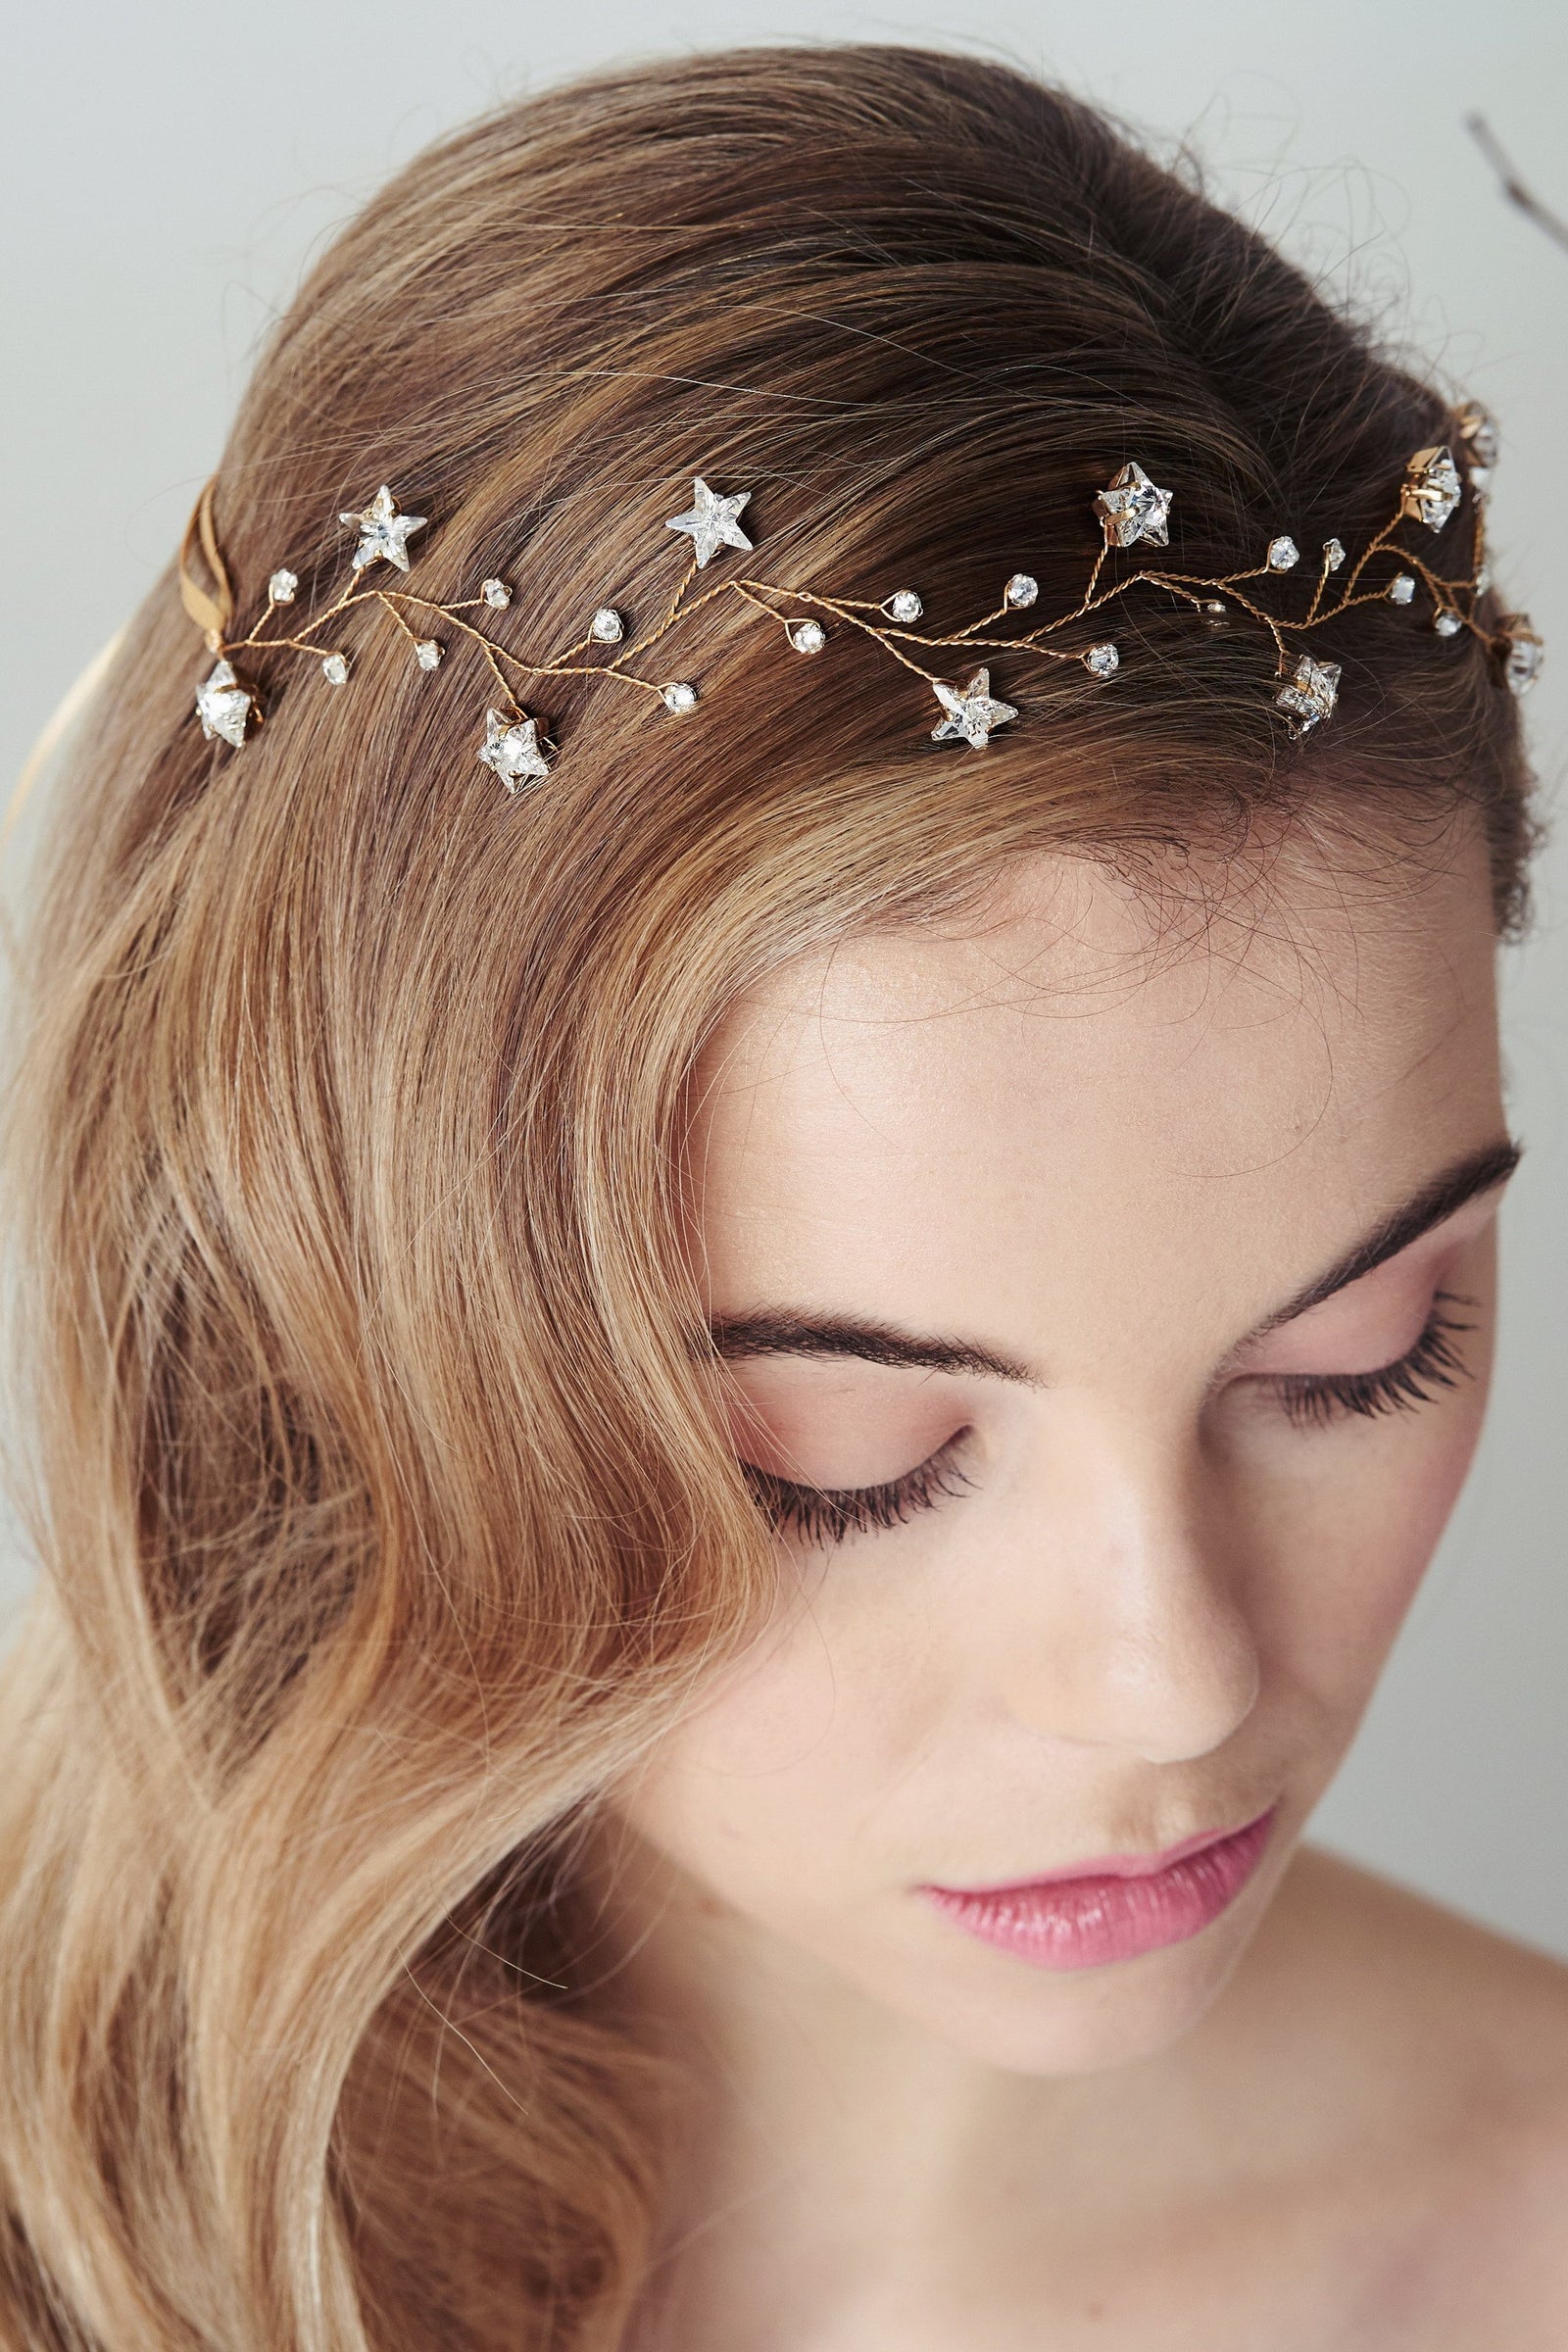 12 Stunning Bridal Hair Accessories for Your Wedding Day